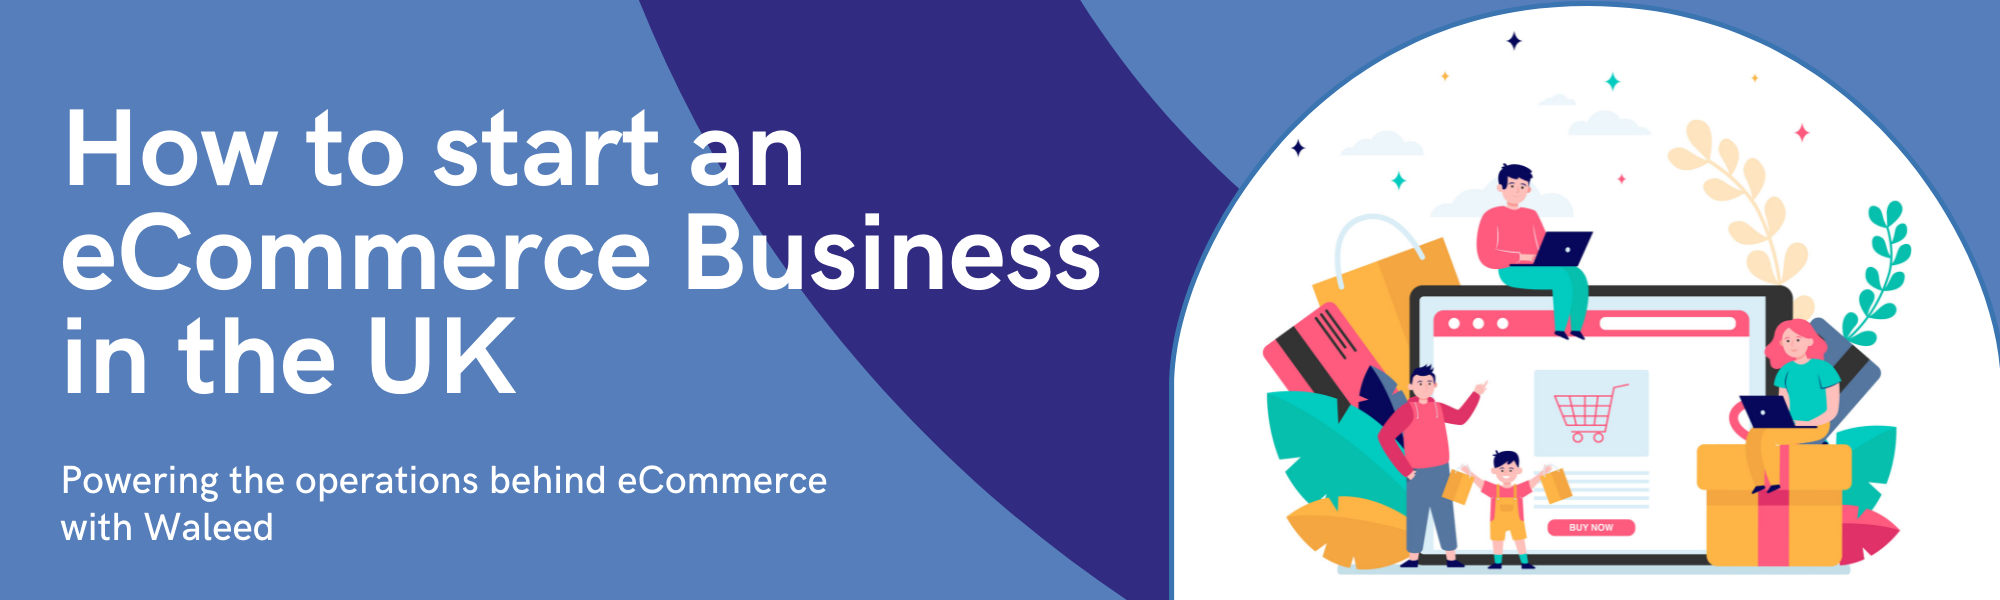 How to start an eCommerce business in the UK?